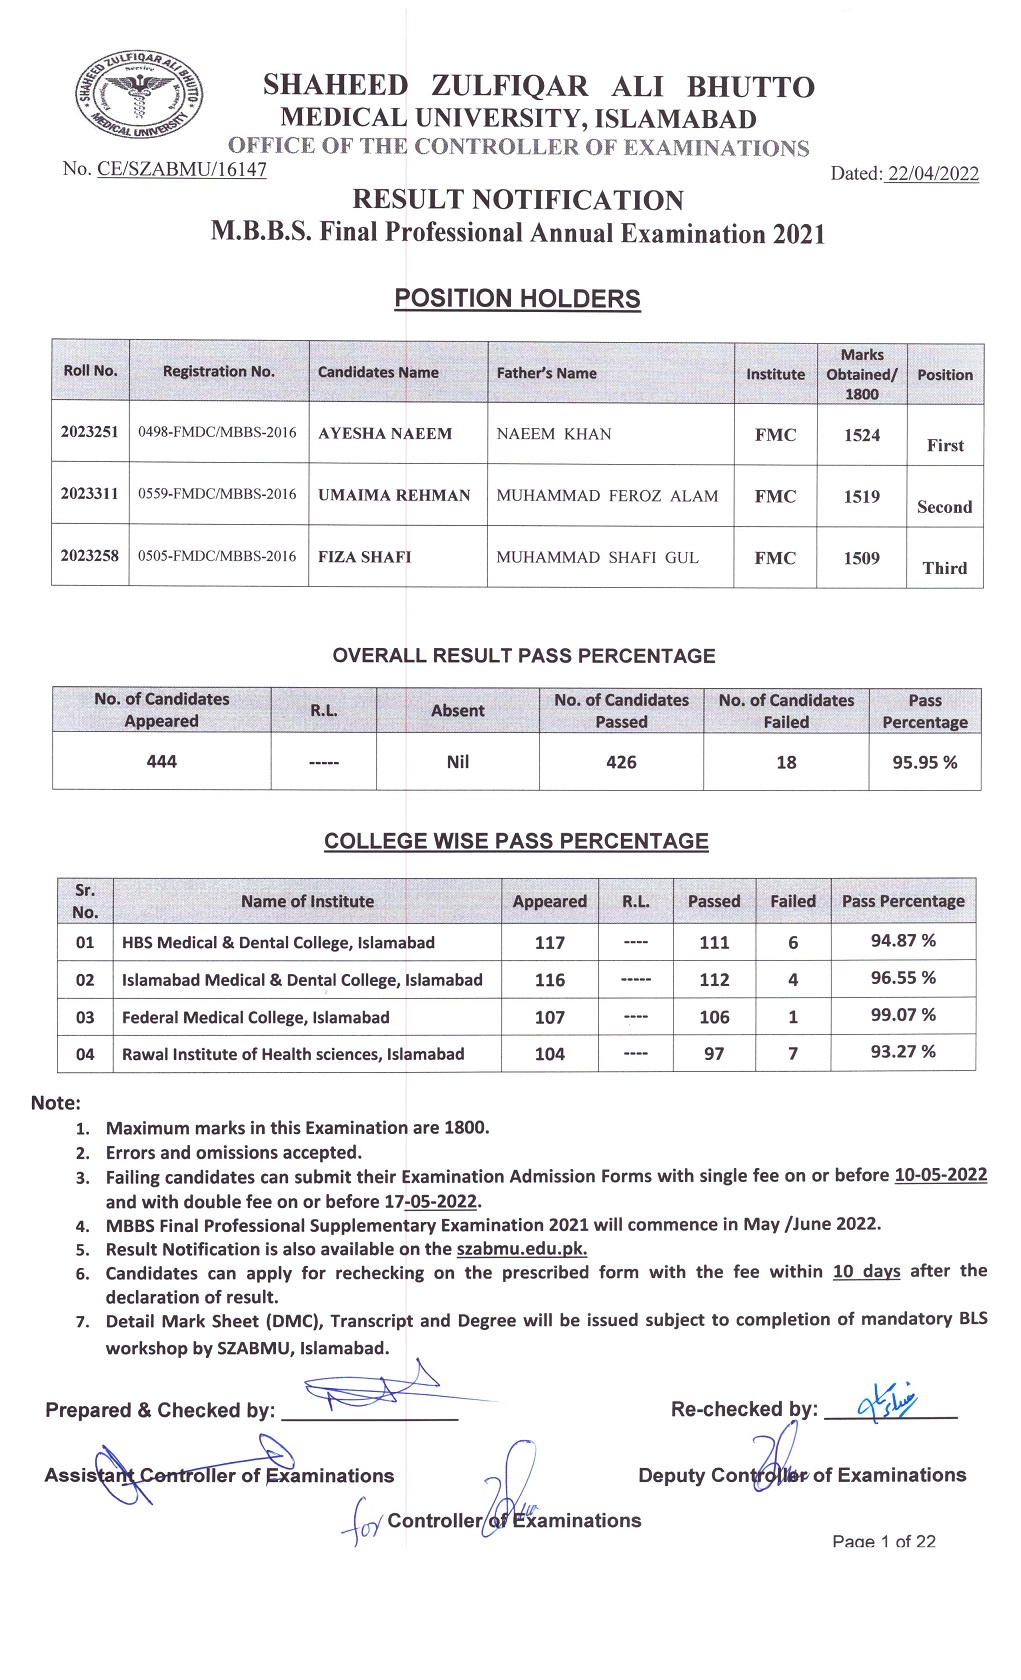 Result Notification - MBBS Final Professional Annual Examination 2021